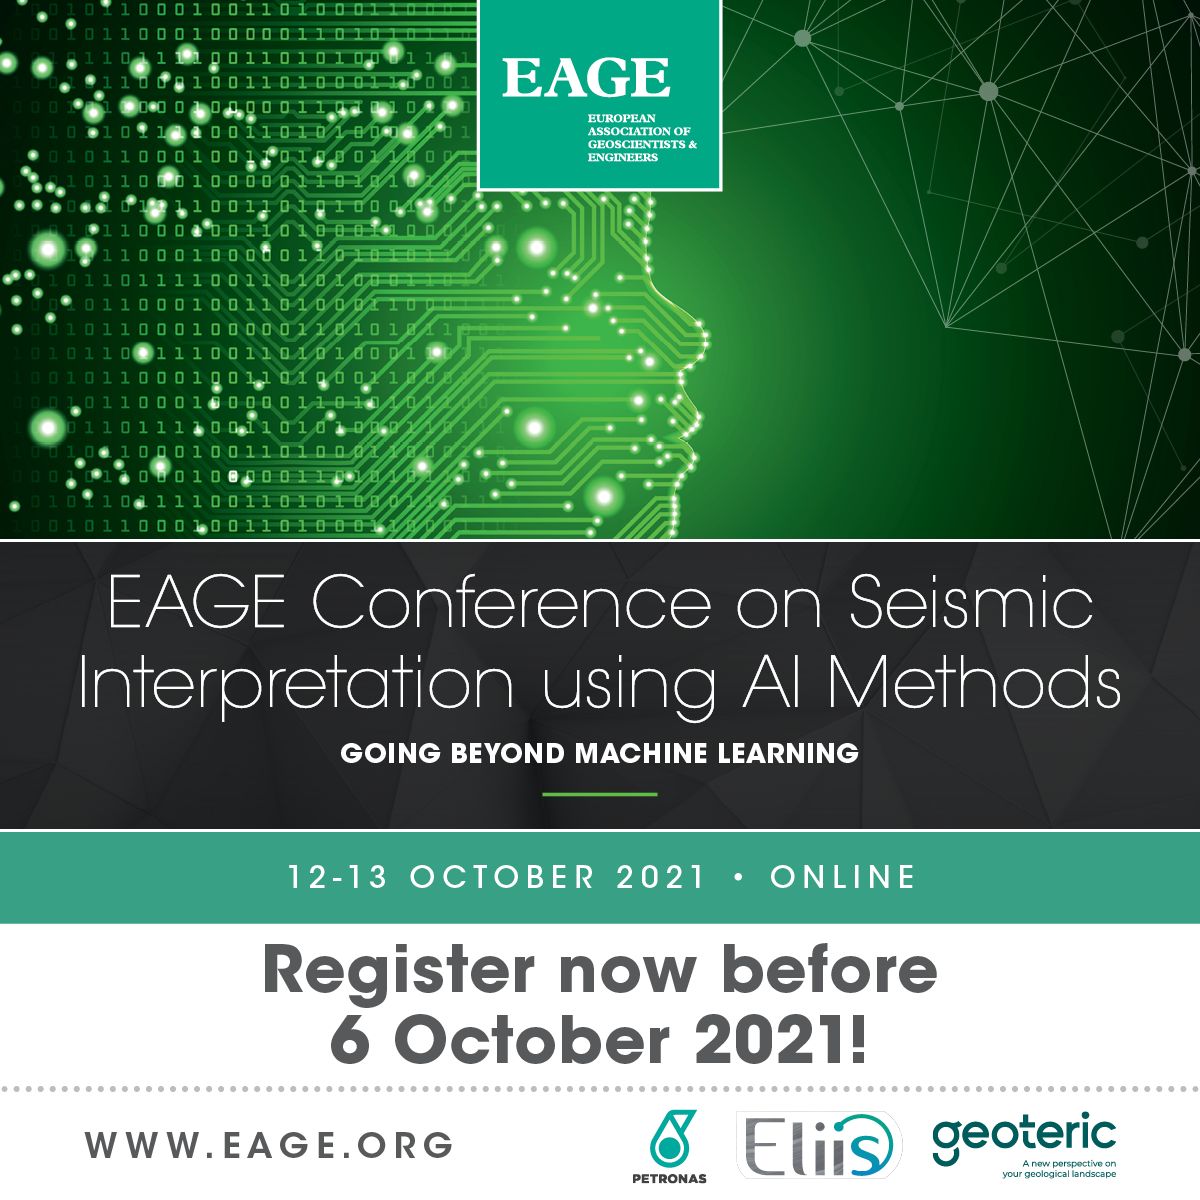 EAGE conference